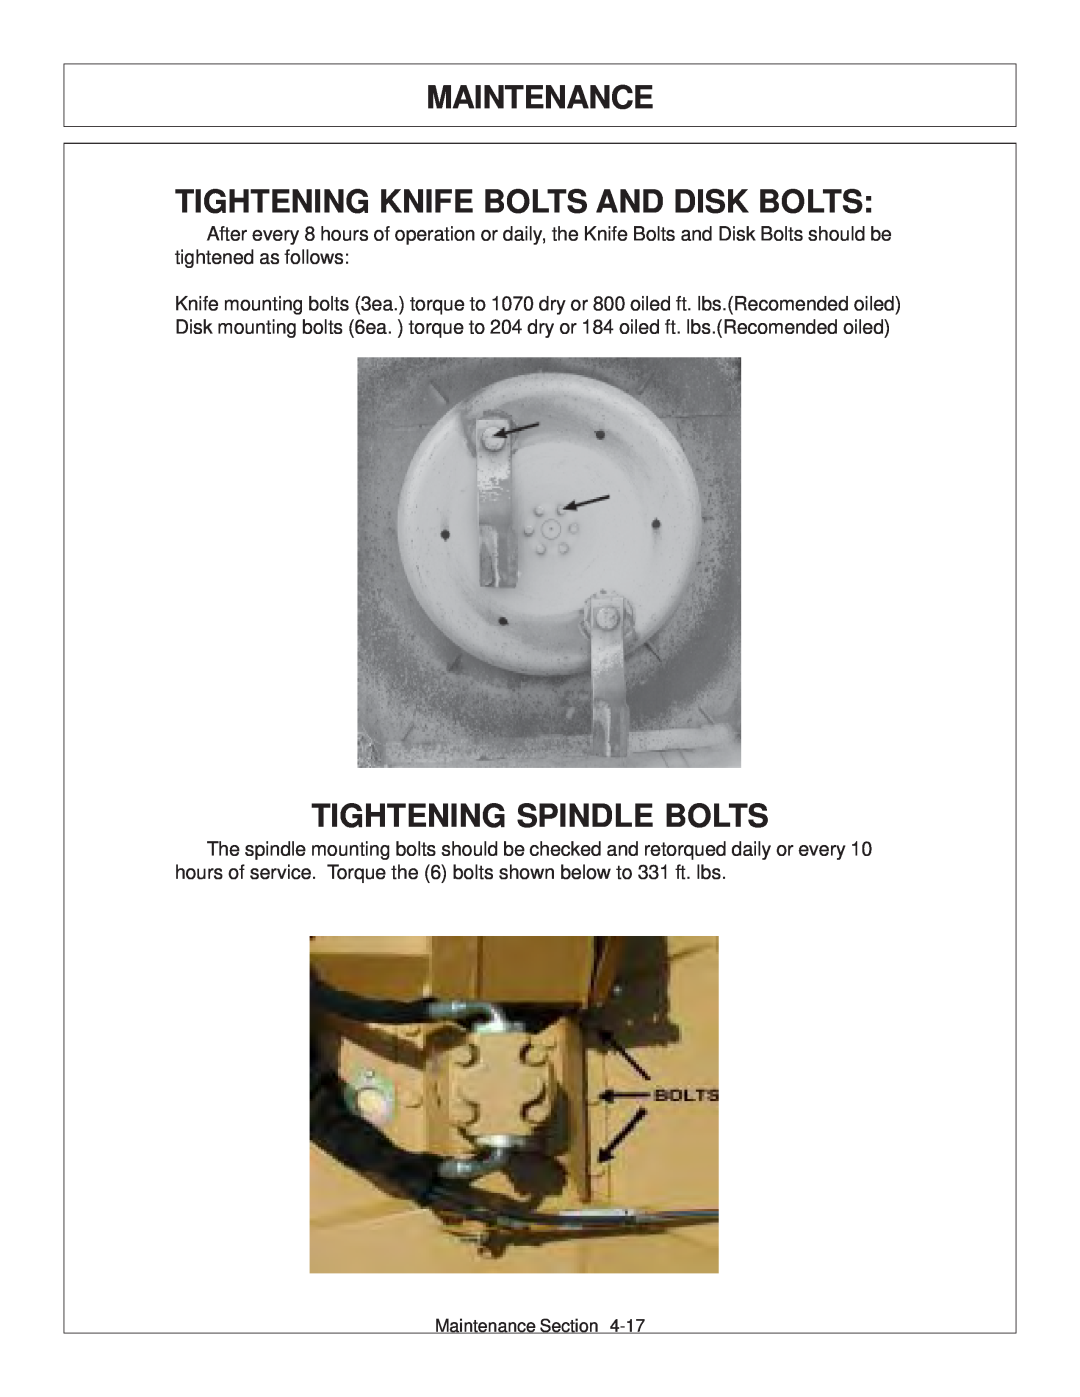 Tiger JD 62-6420 manual Tightening Knife Bolts And Disk Bolts, Tightening Spindle Bolts, Maintenance 